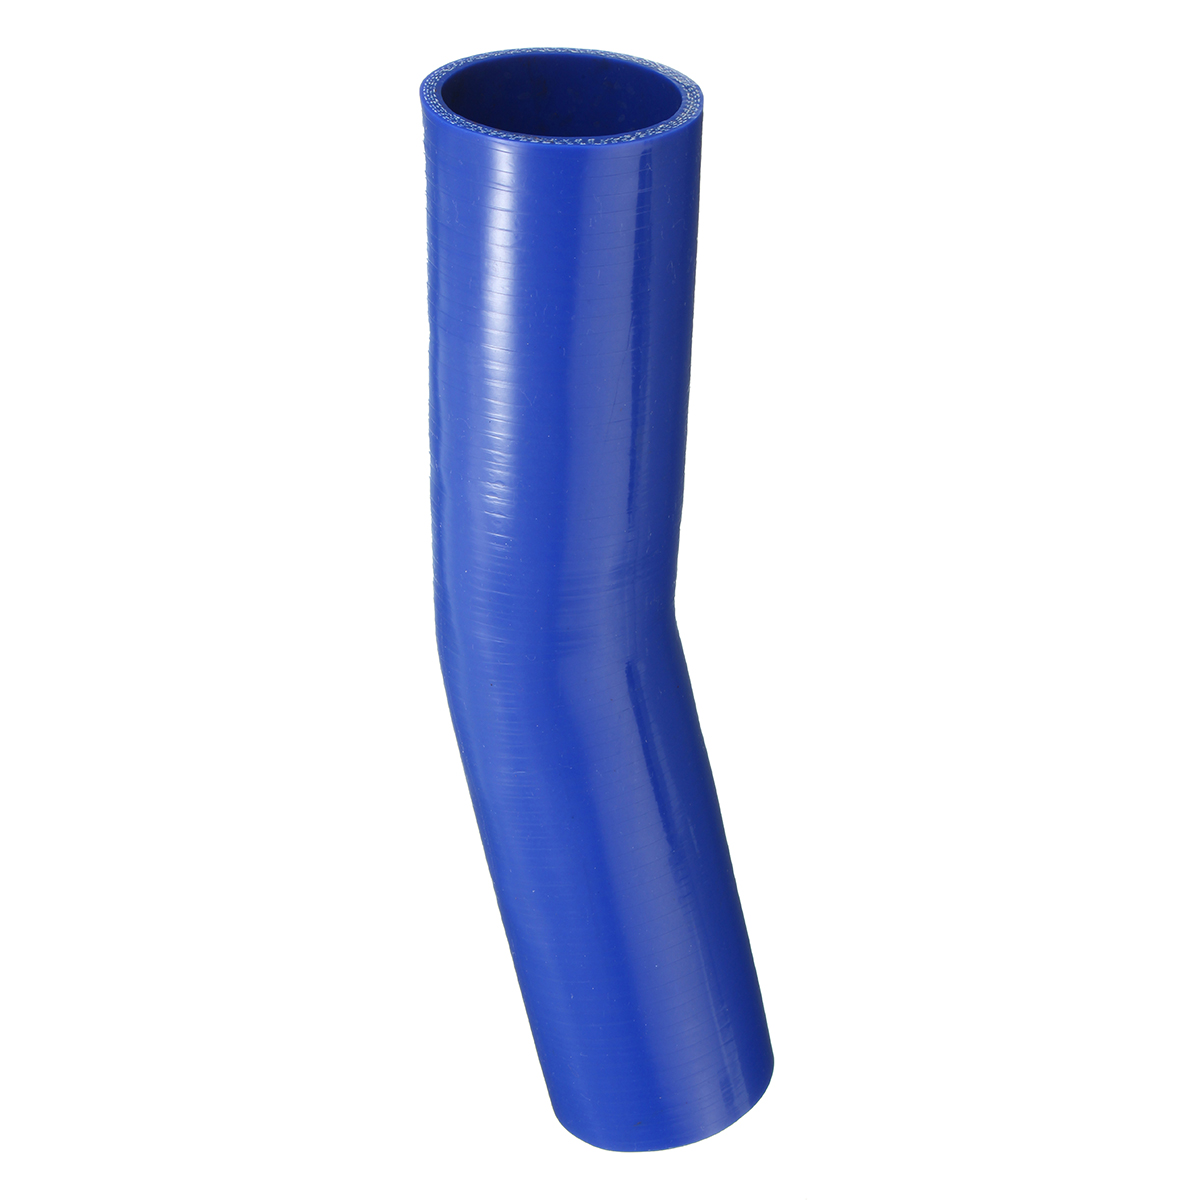 150mm-Silicone-Hose-Rubber-15-Degree-Elbow-Bend-Hose-Air-Water-Coolant-Joiner-Pipe-Tube-1587657-3